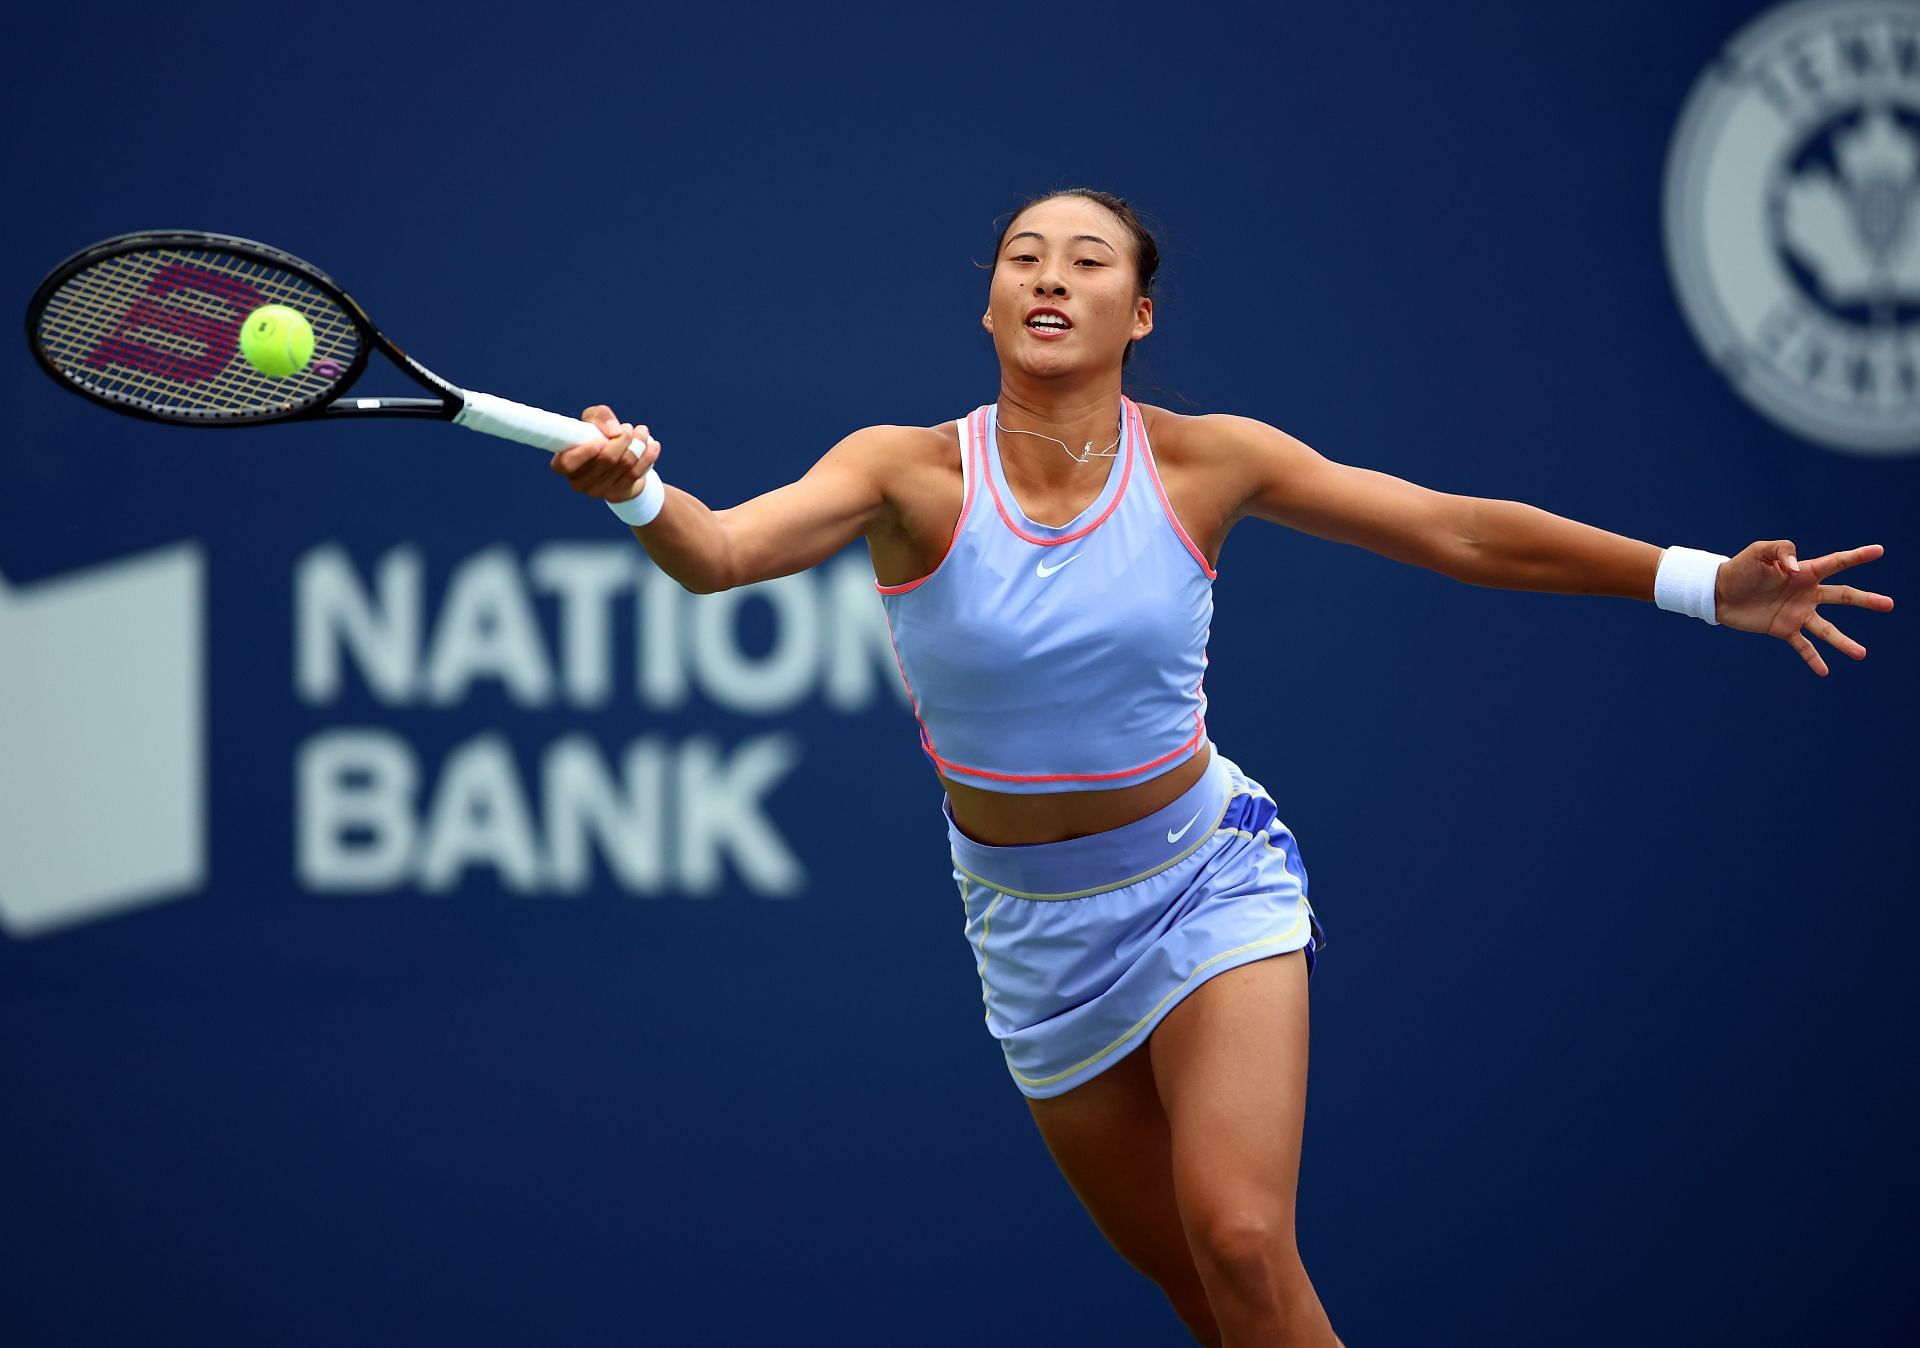 Zheng has posted three wins in Adelaide, having come through the qualifiers.